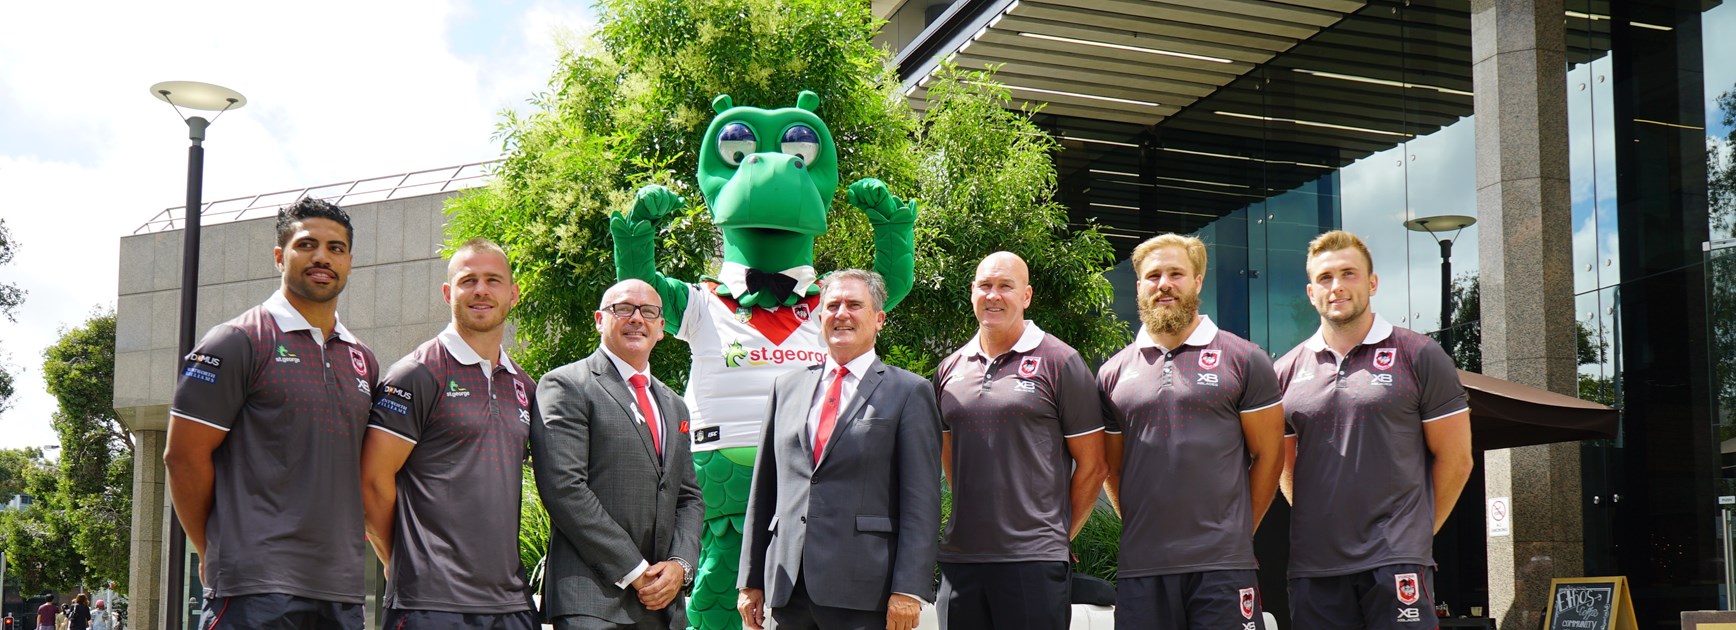 St George Illawarra Dragons players at the announcement of sponsor St George Bank extending their partnership with the club.